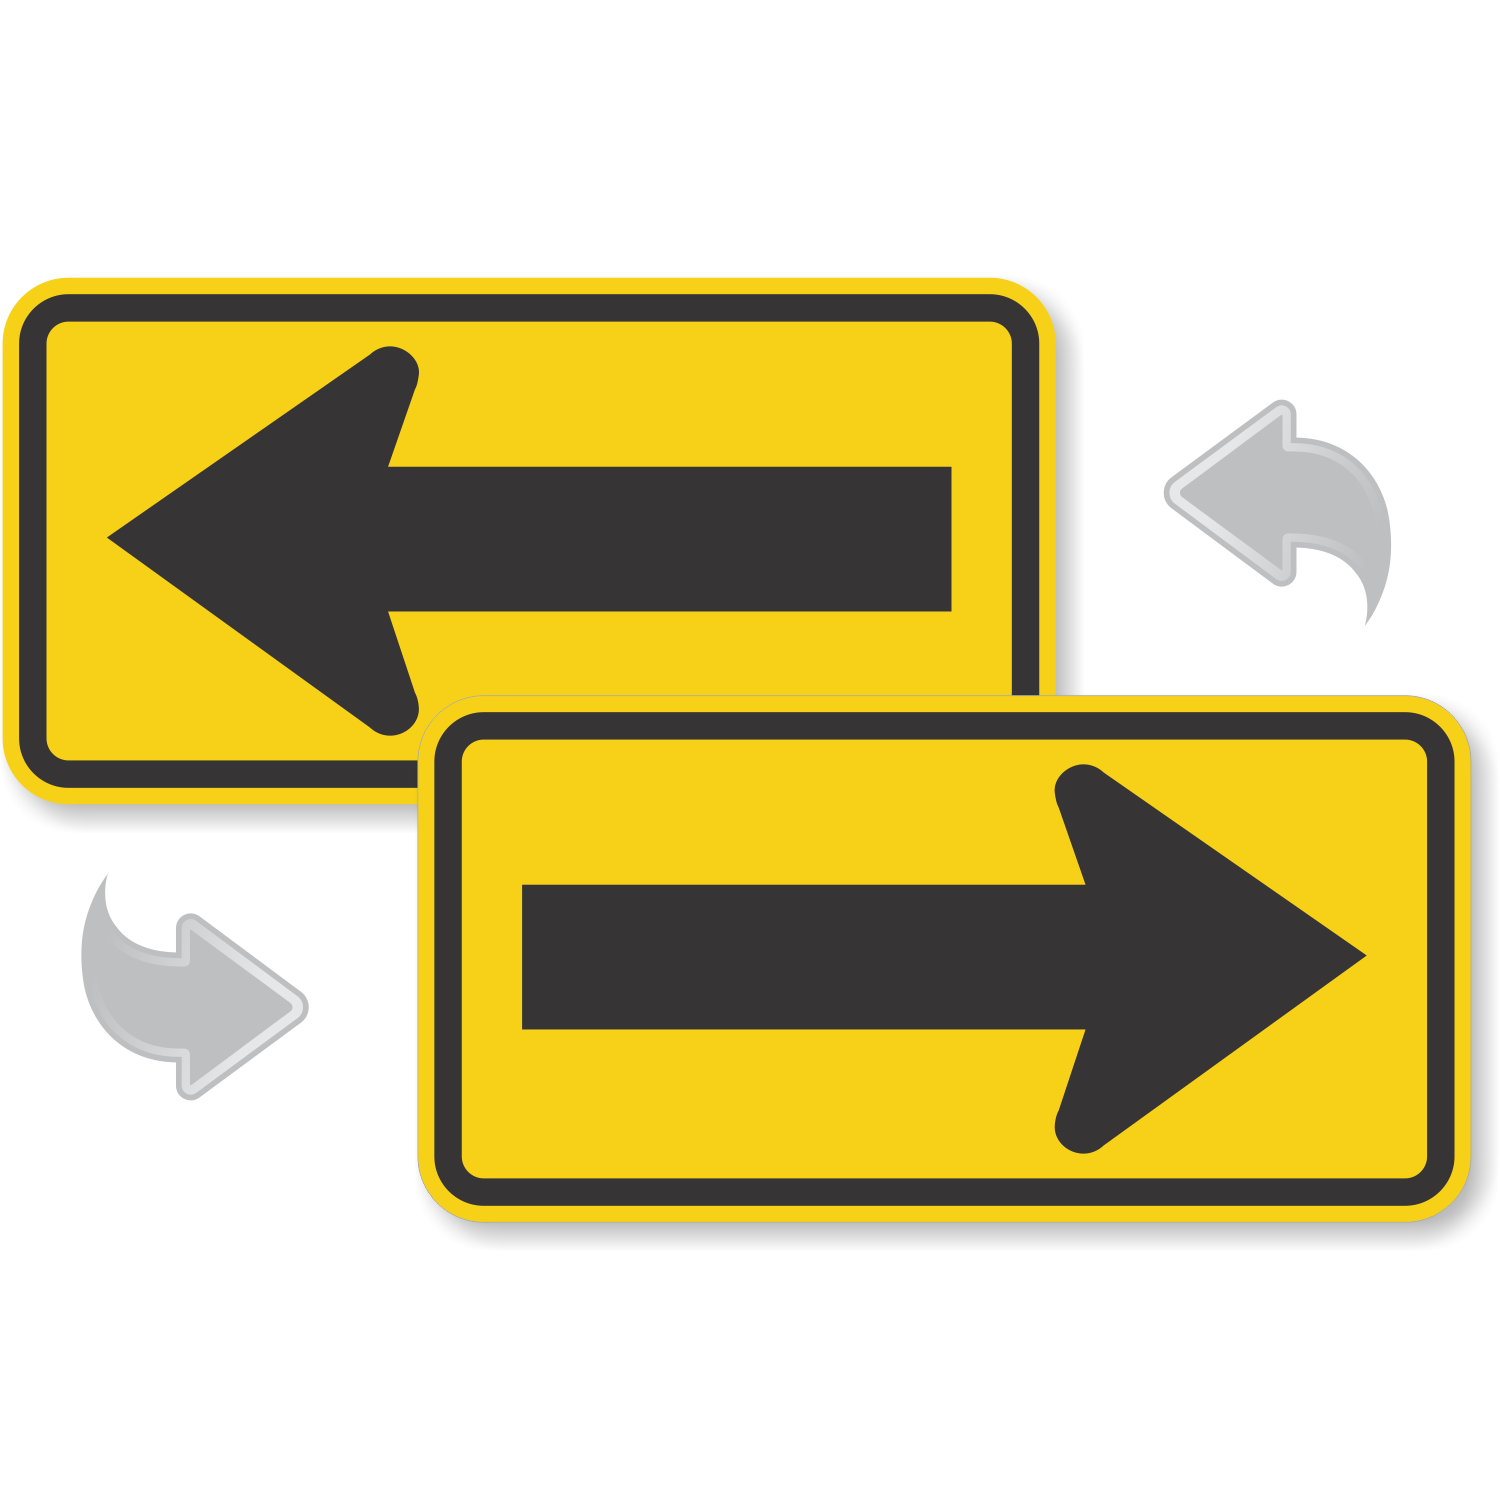 Keep Left Self Adhesive Right Direction Arrow reflective sign Magnetic 